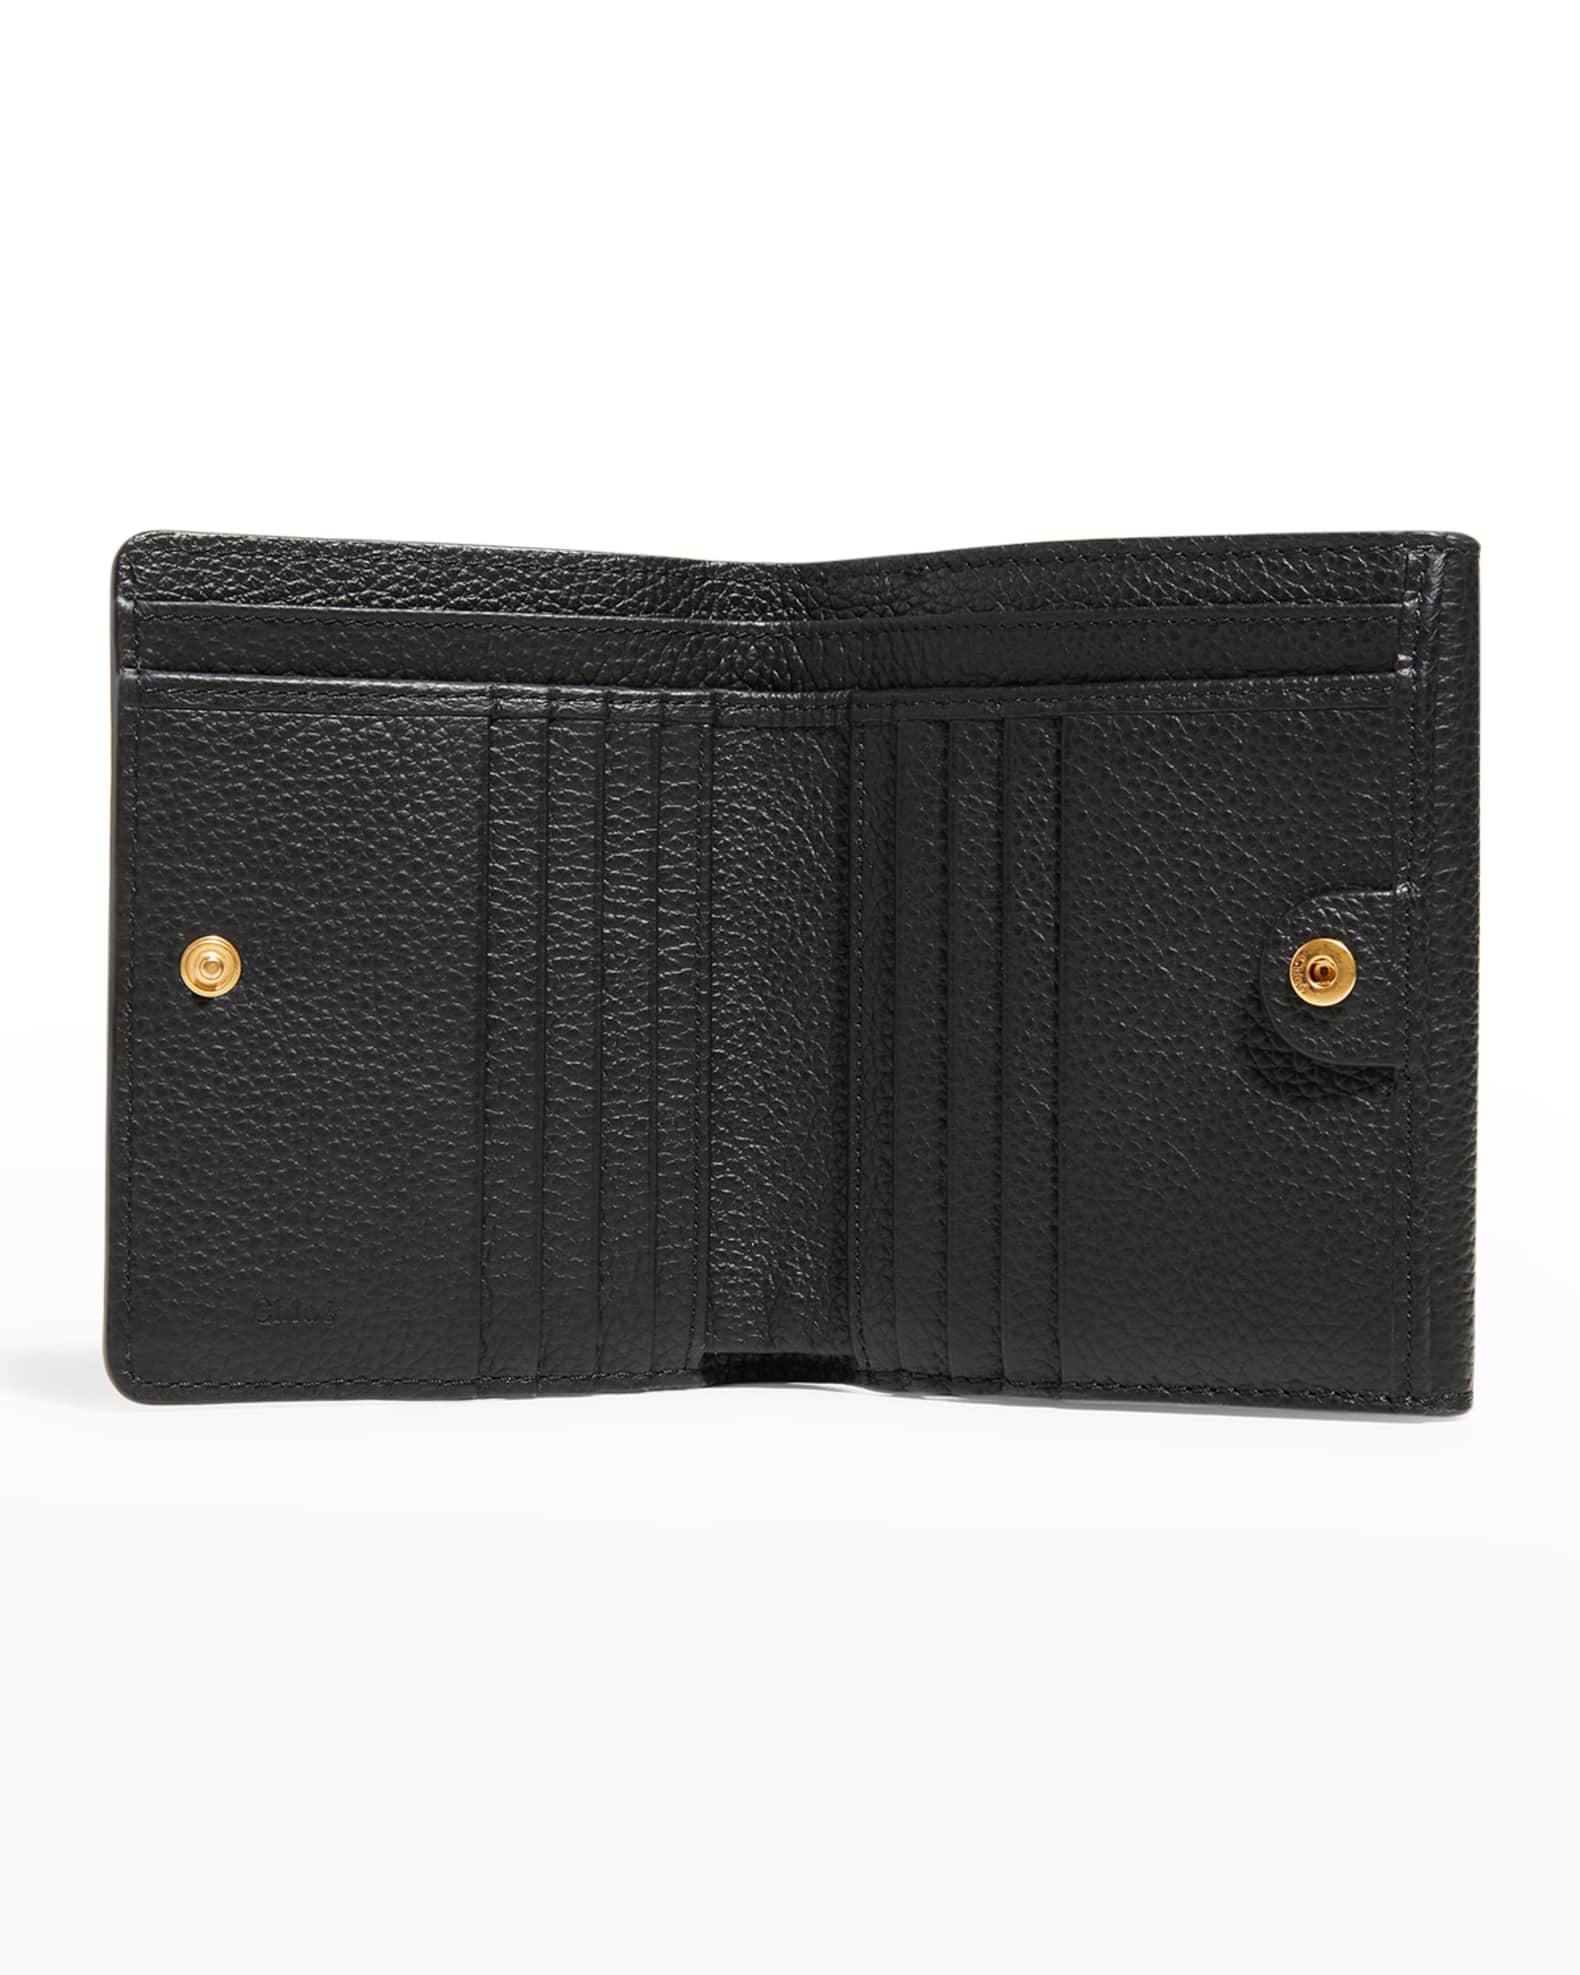 Chloe Marcie Square Flap Wallet in Grained Leather | Neiman Marcus